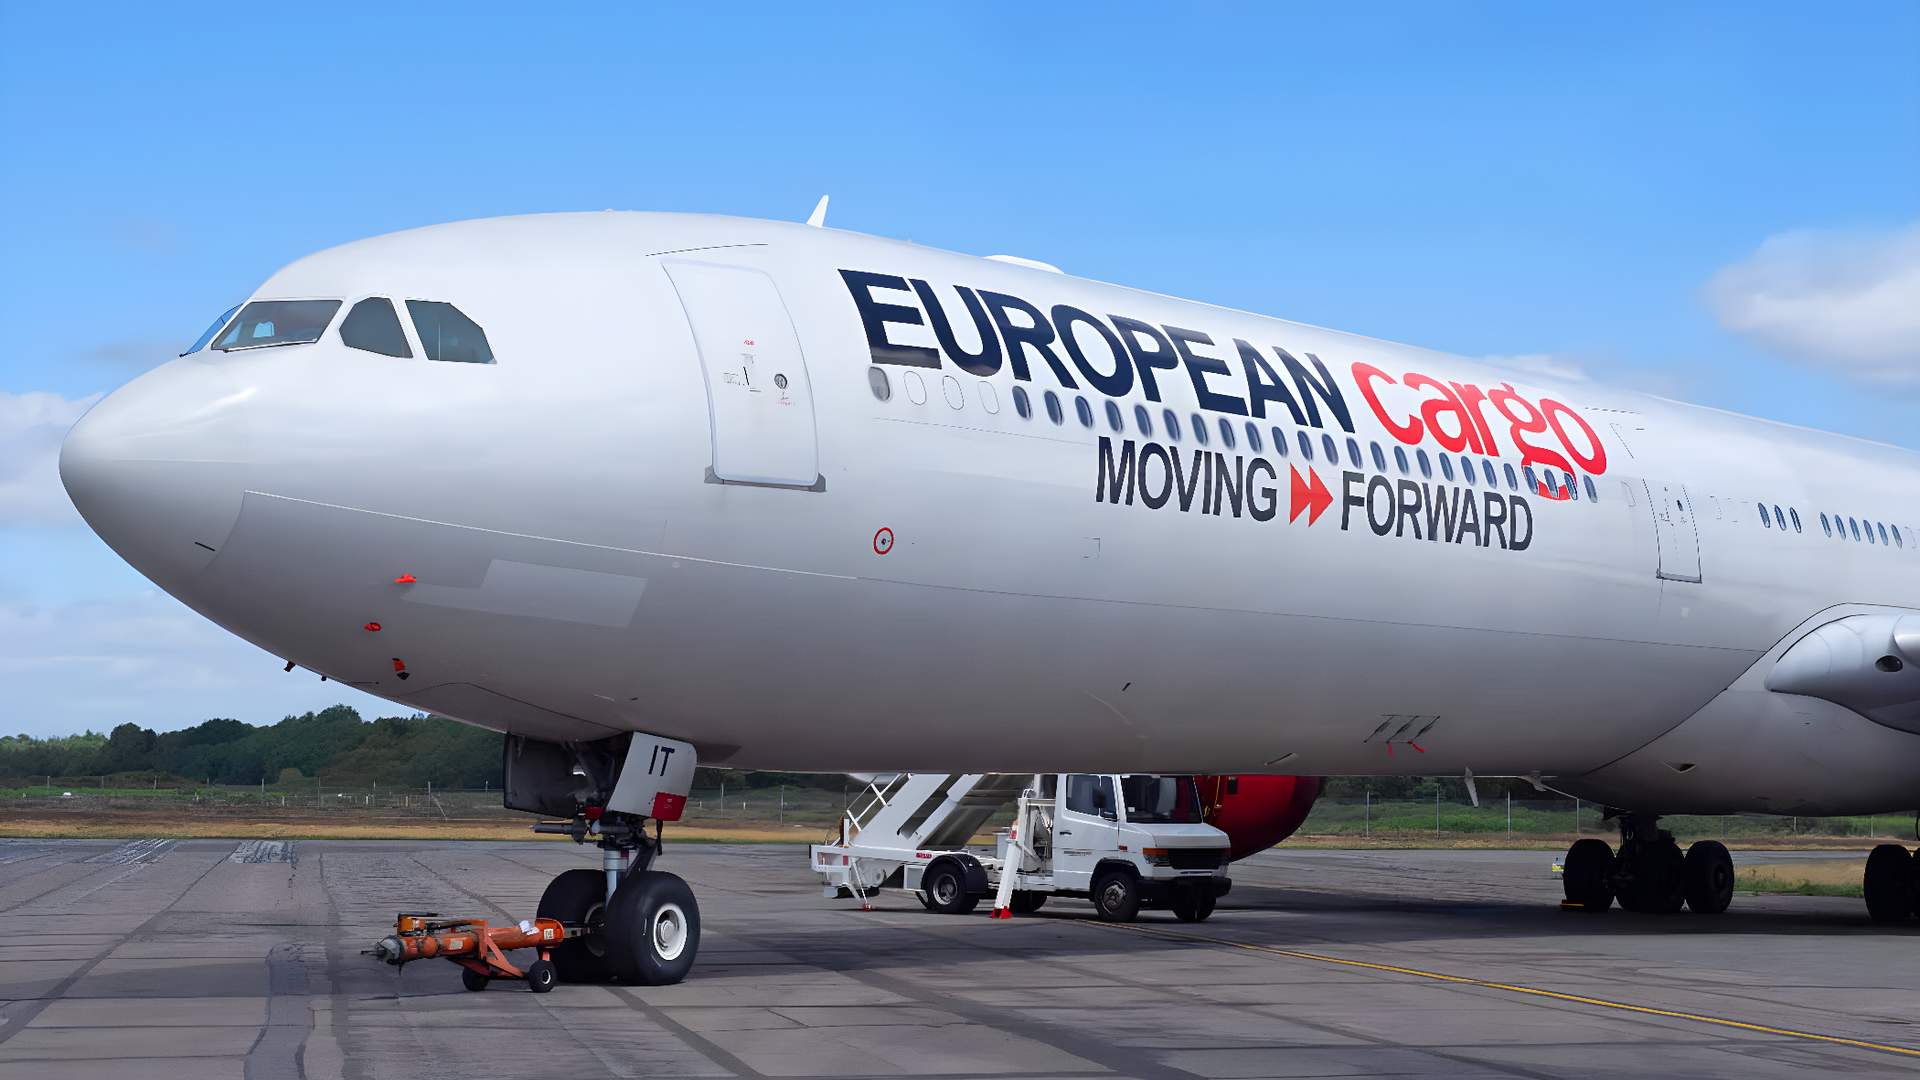 European Cargo – Are “Preighters” Still A Thing? Well… Not Quite